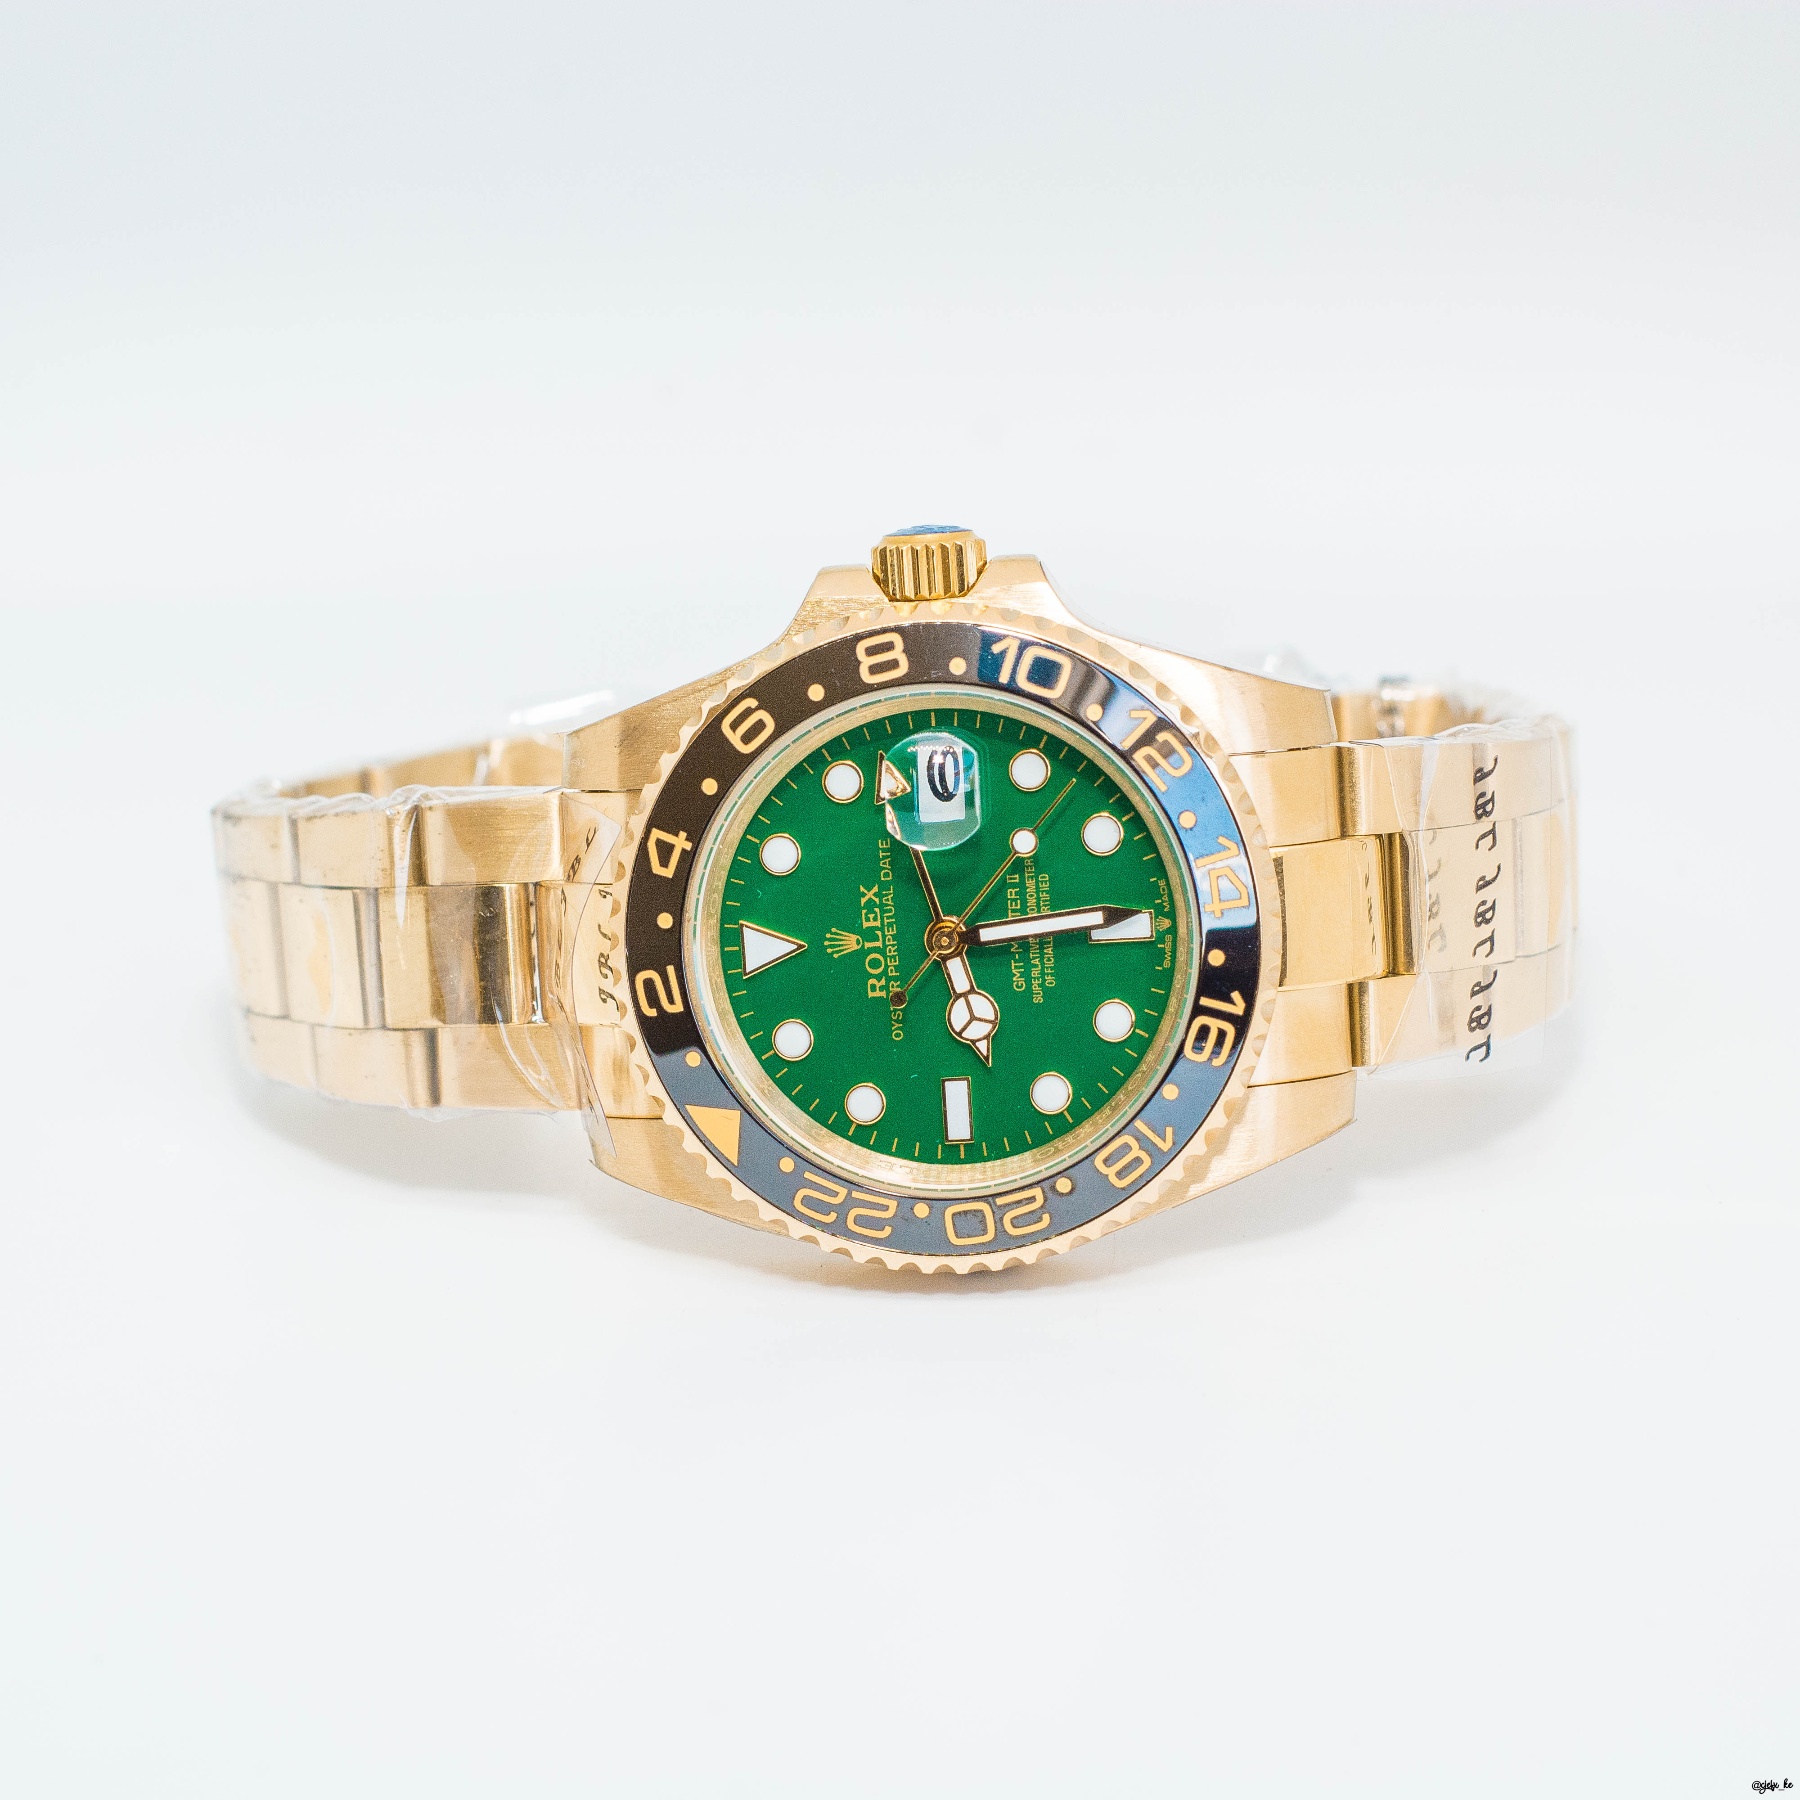 BUY THIS ROLEX GMT-MASTER II 18KT YELLOW GOLD GREEN DIAL FOR SALE IN NAIROBI KENYA.0724681225